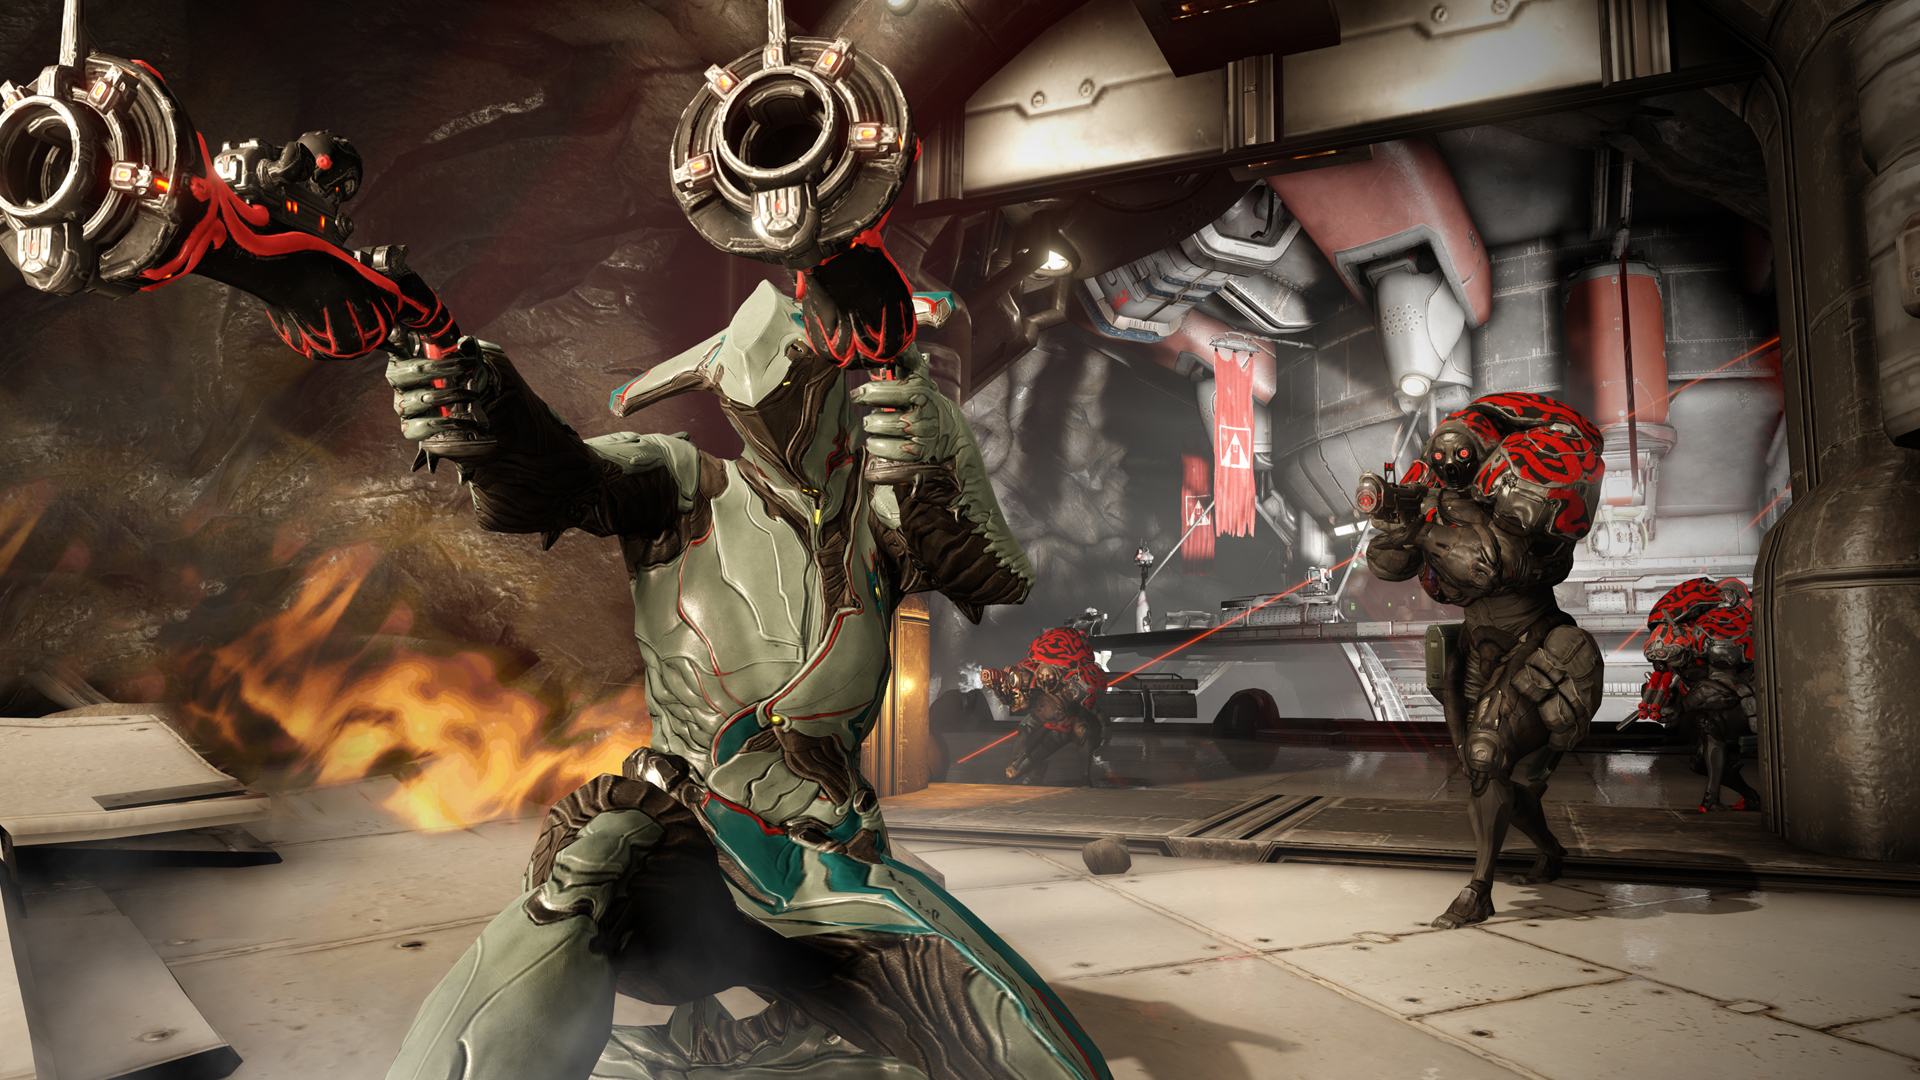 Best free PC games: Warframe. A screenshot shows a character in futuristic attire pointing a gun at someone off camera.